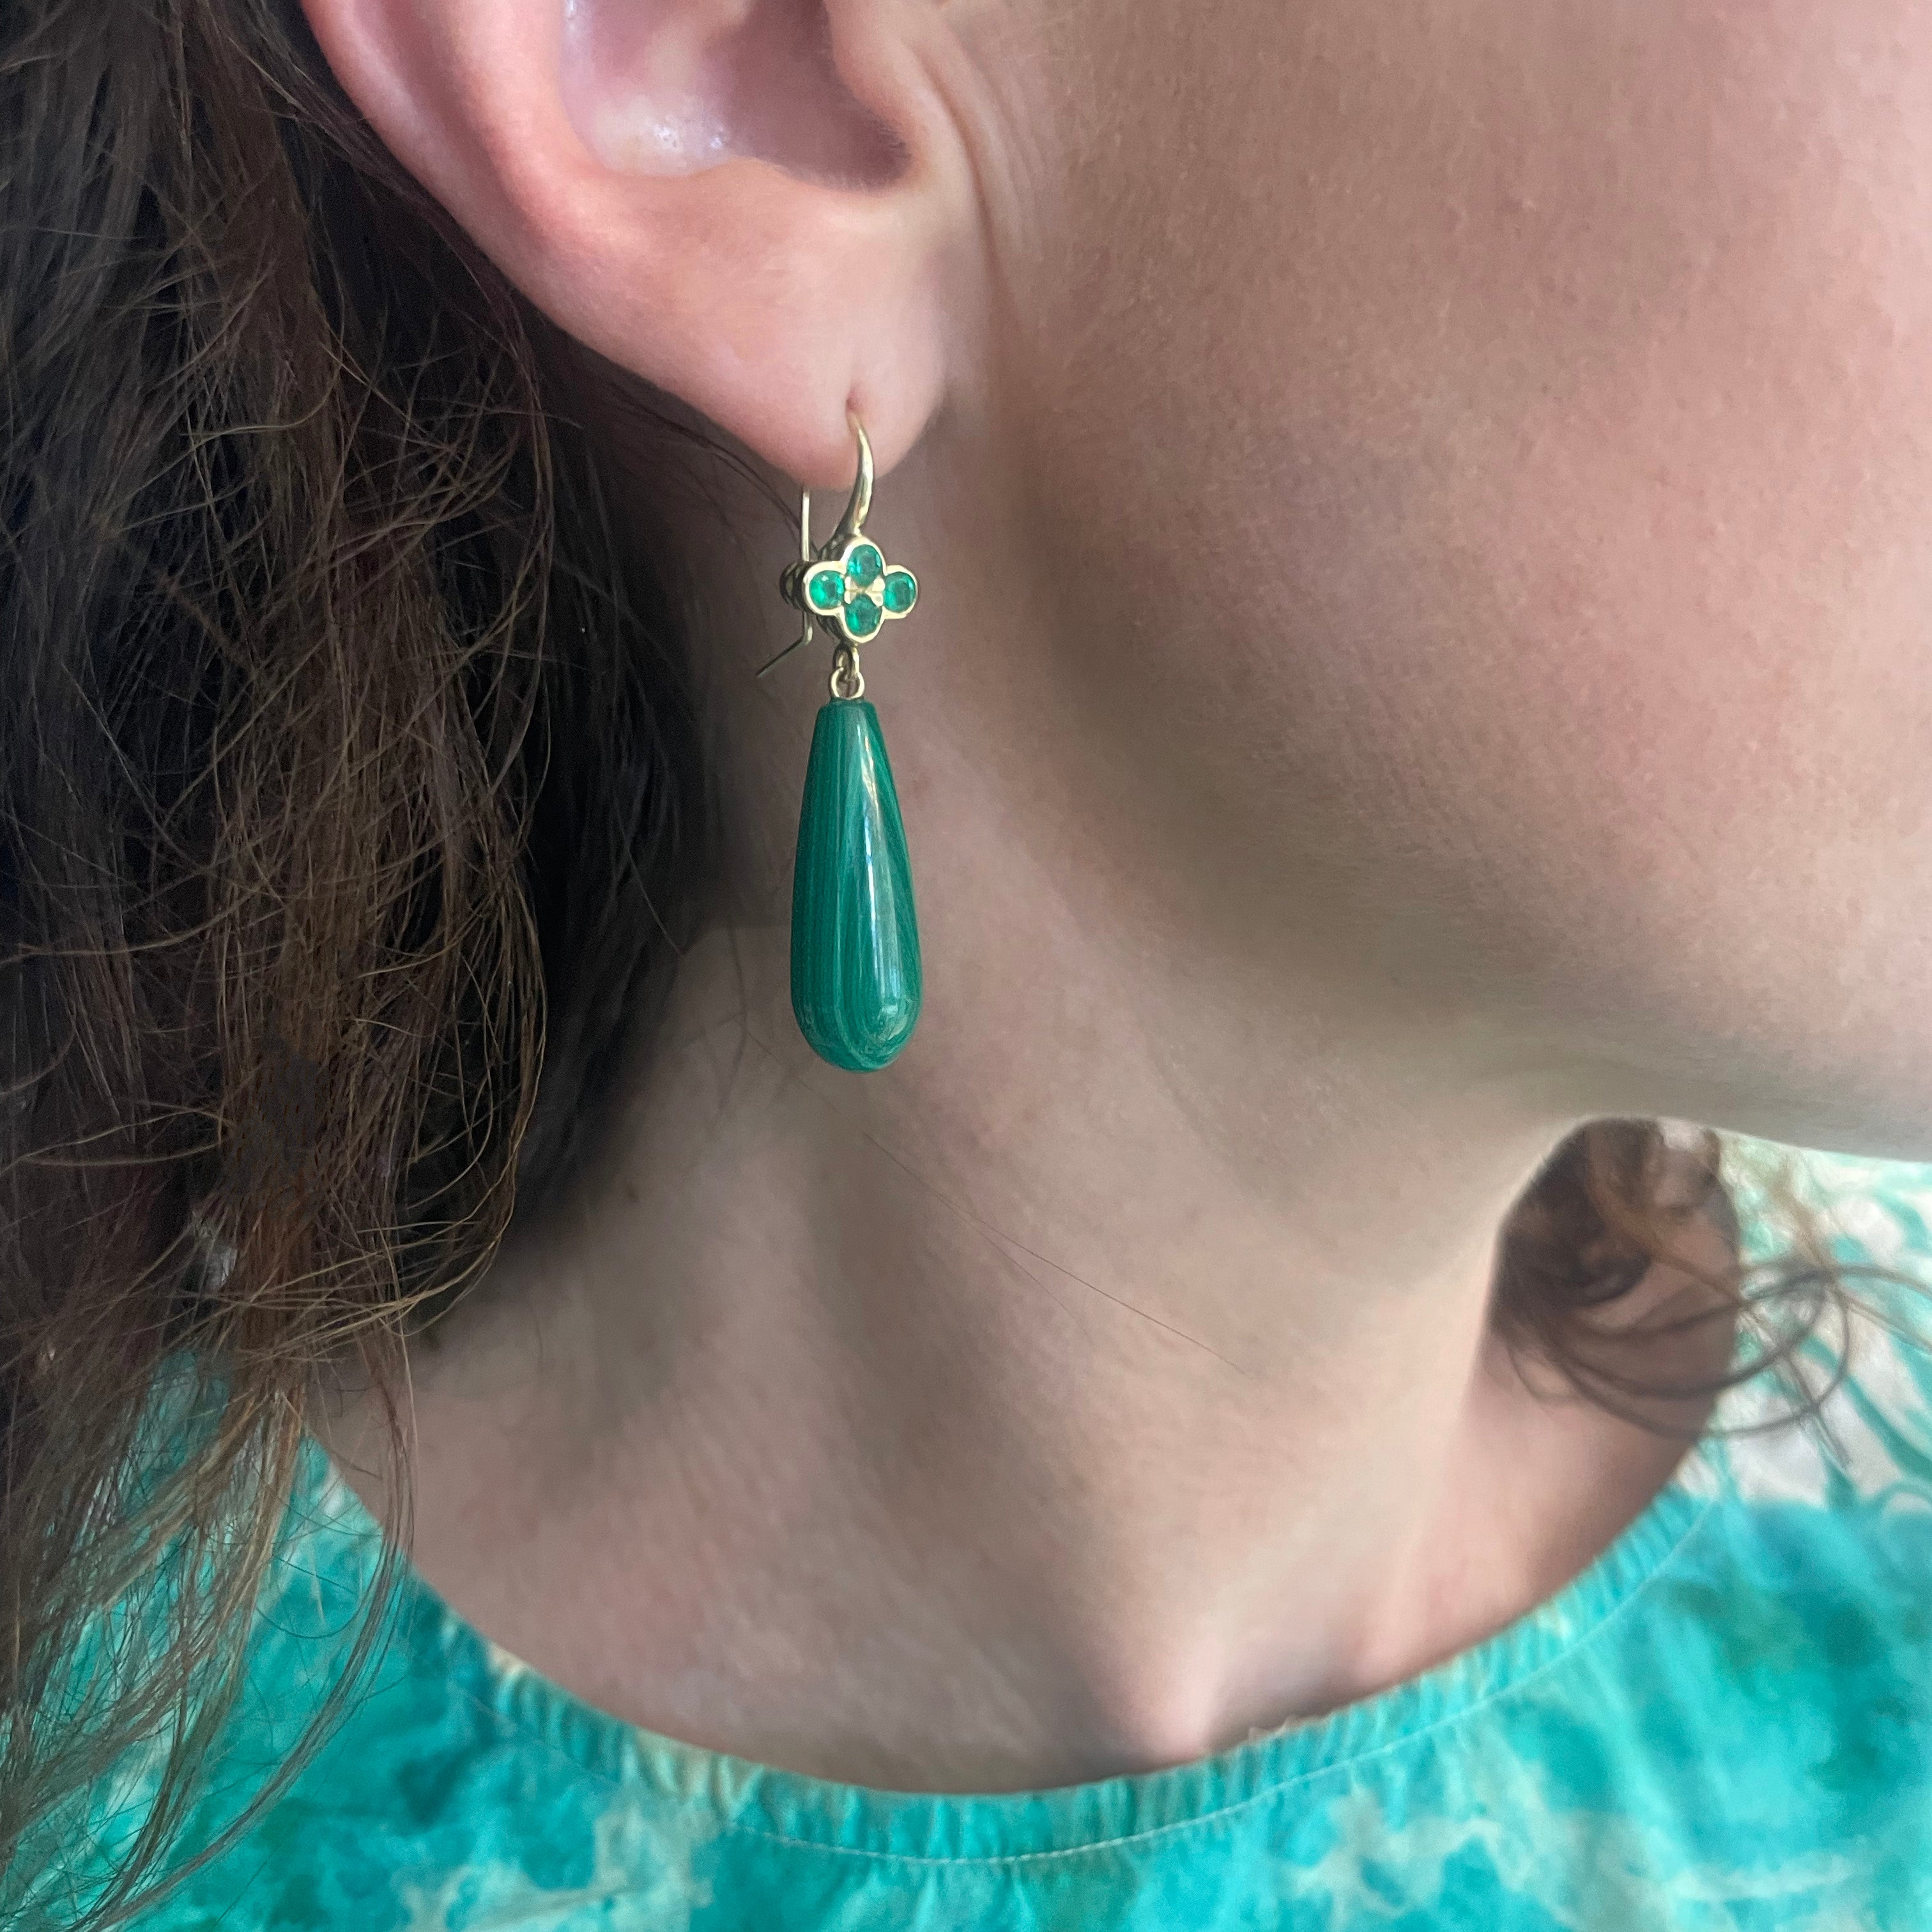 Emerald Clover Top Earrings with Malachite drops